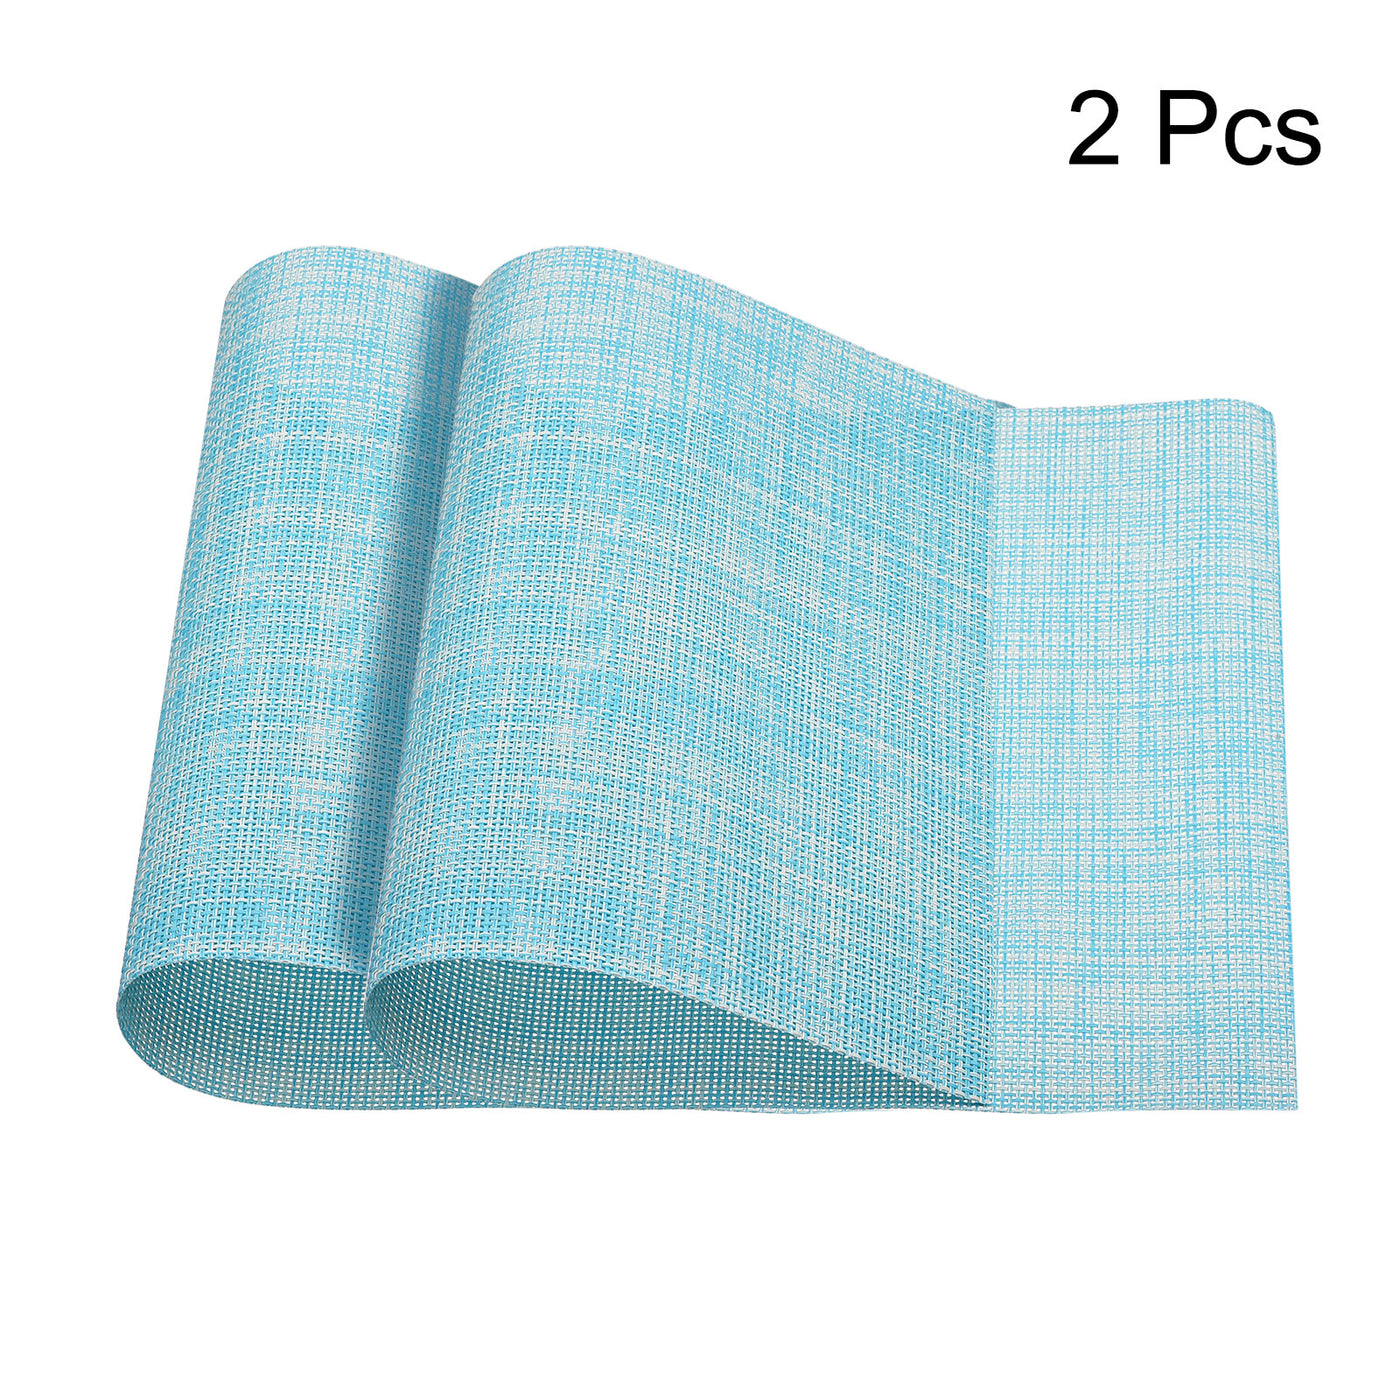 uxcell Uxcell Place Mats, 450x300mm Table Mats Set of 2 PVC Washable Woven Placemat Blue